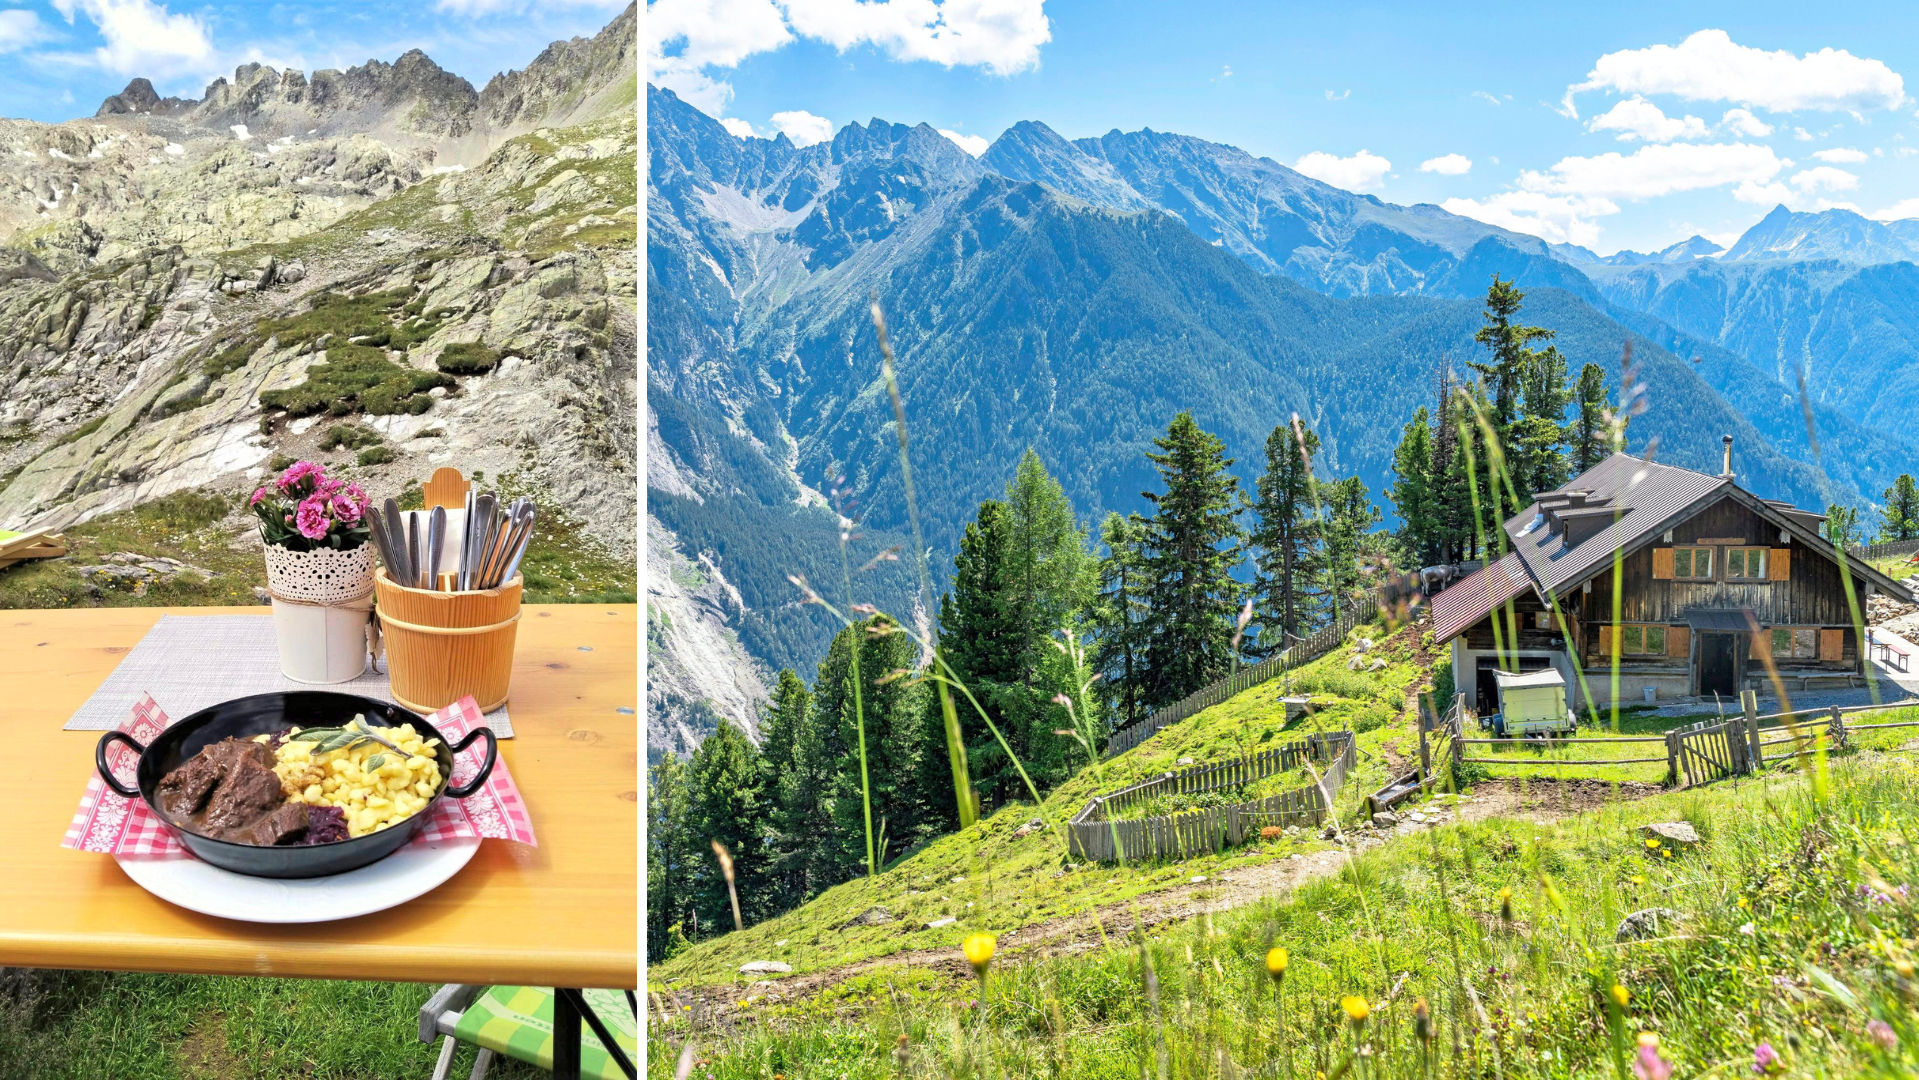 A regional game dish at the Erlanger Hütte (left). At the Armelenhütte (right), meat from their own farm ends up on the plates. (Bild: Peter Freiberger, Ötztal Tourismus/Timm Humpfer)